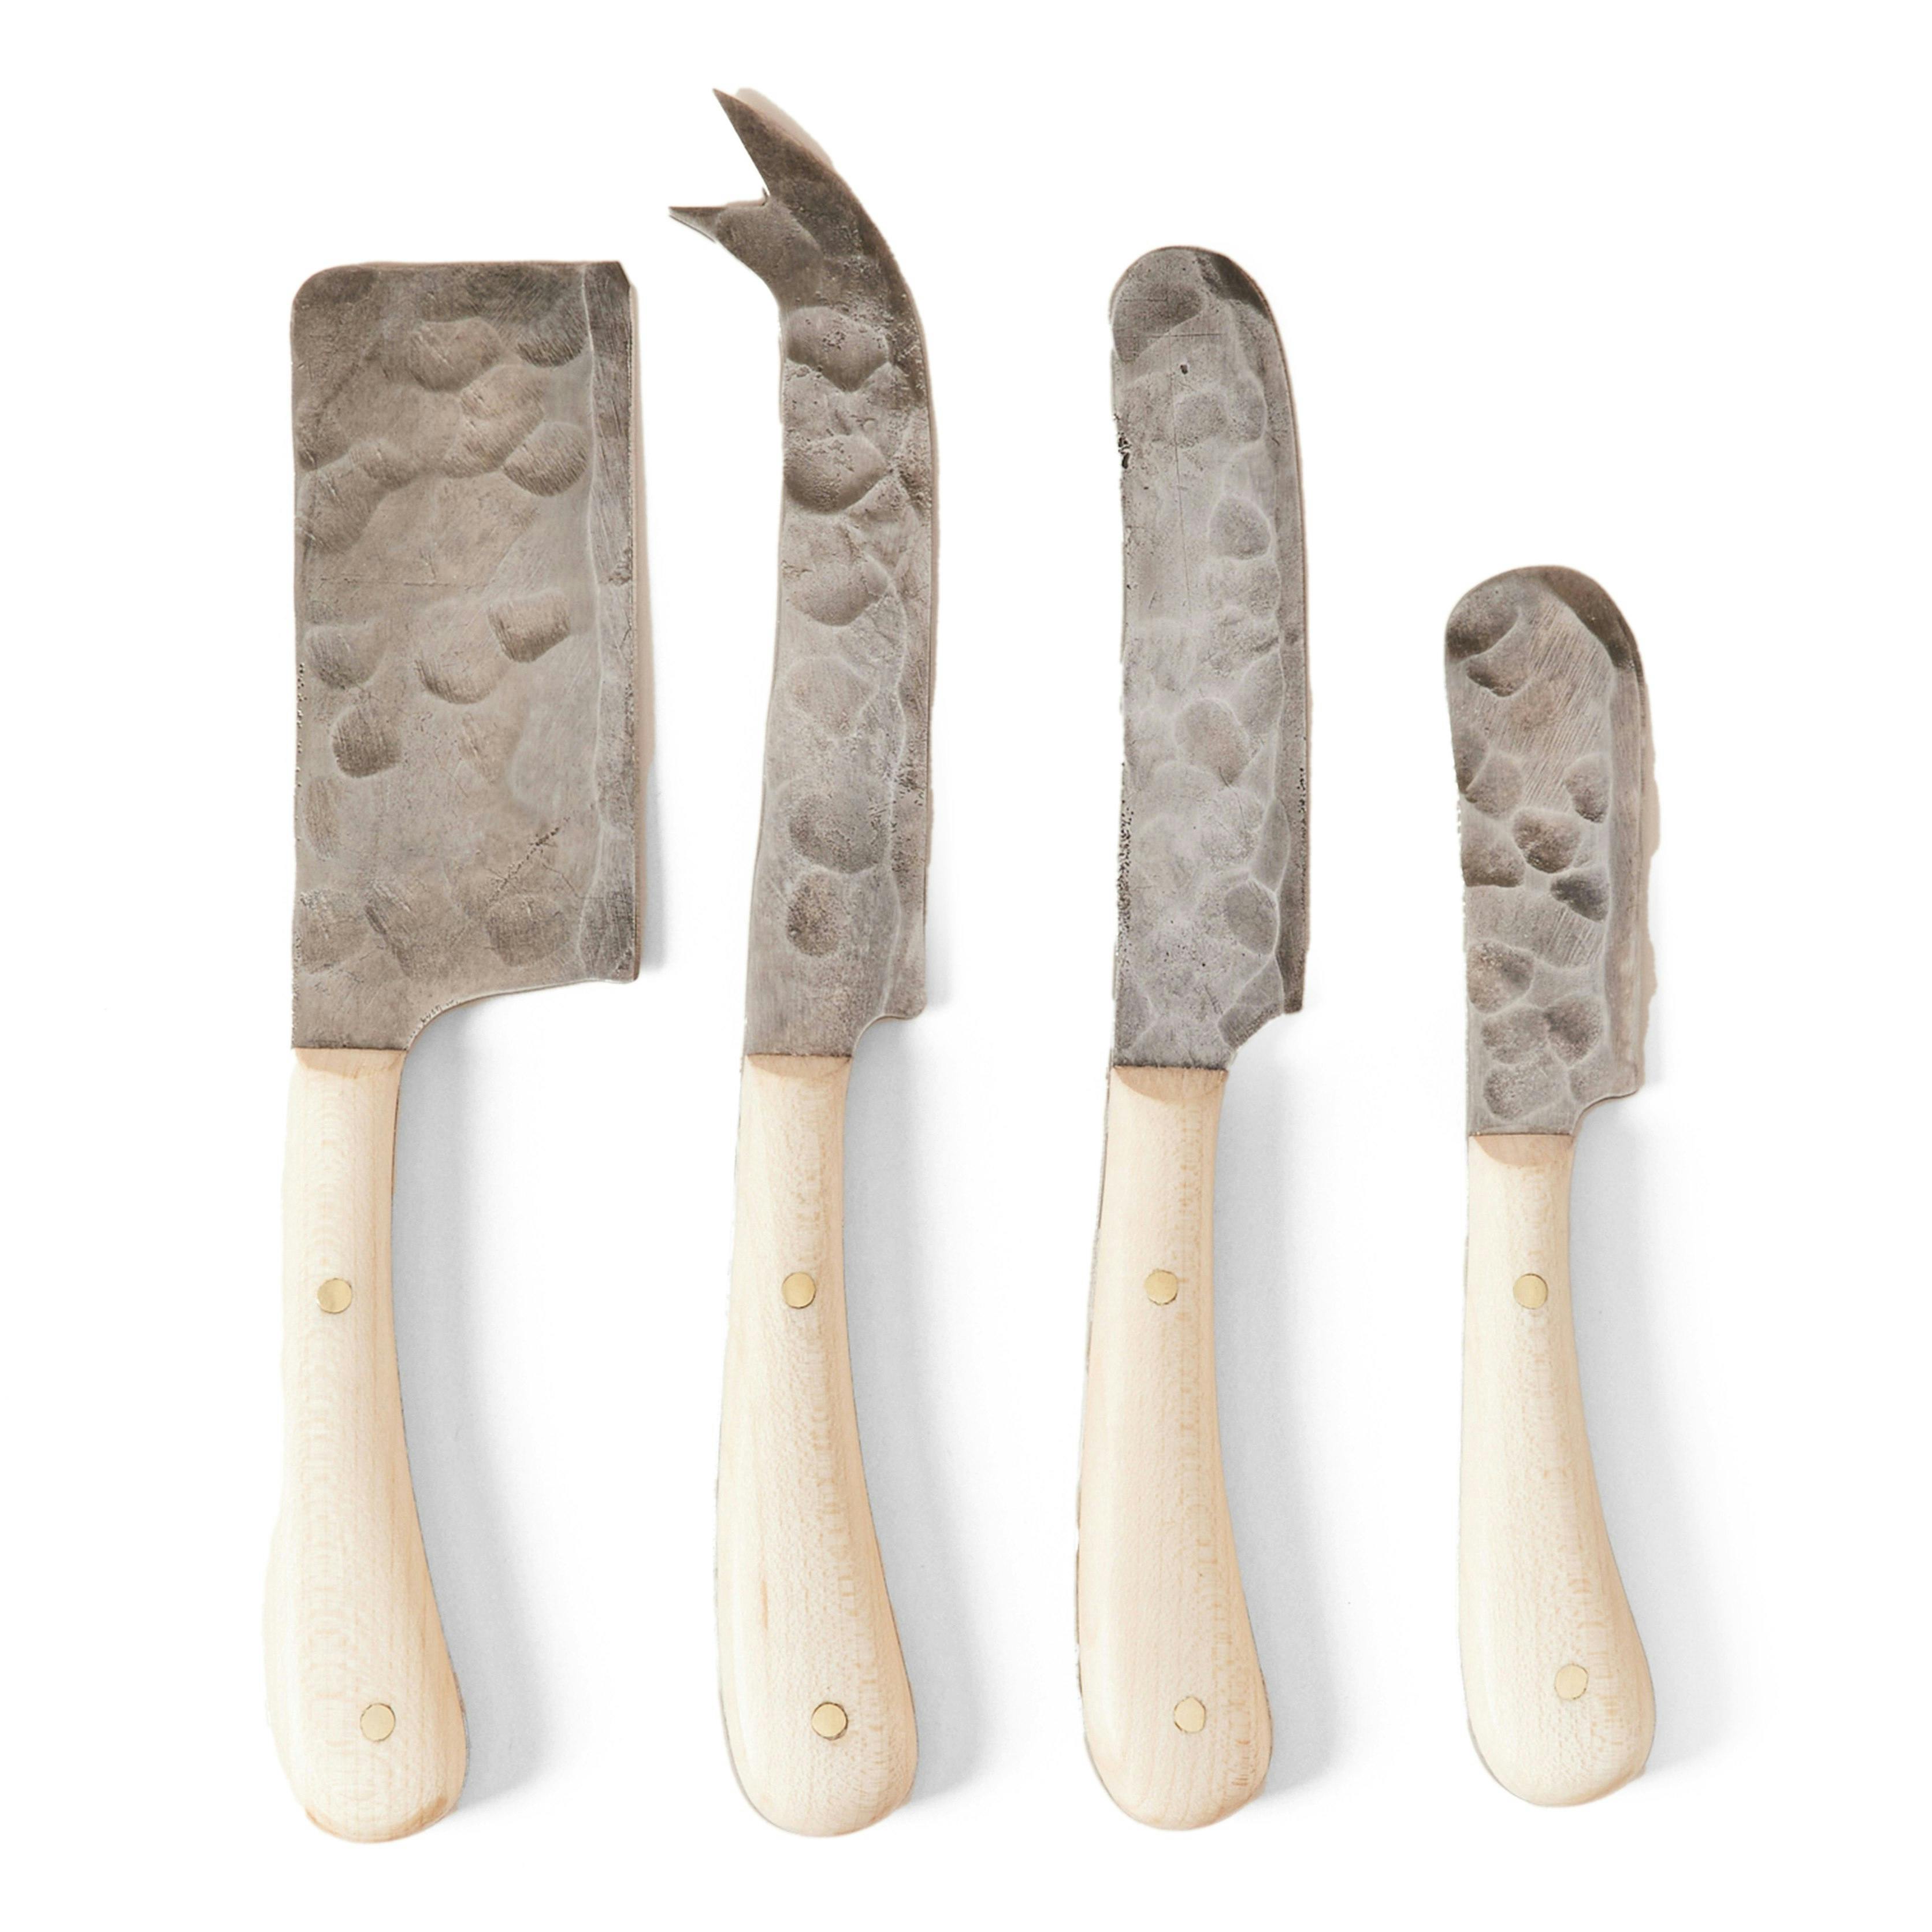 Artisan Forged Cheese Knives